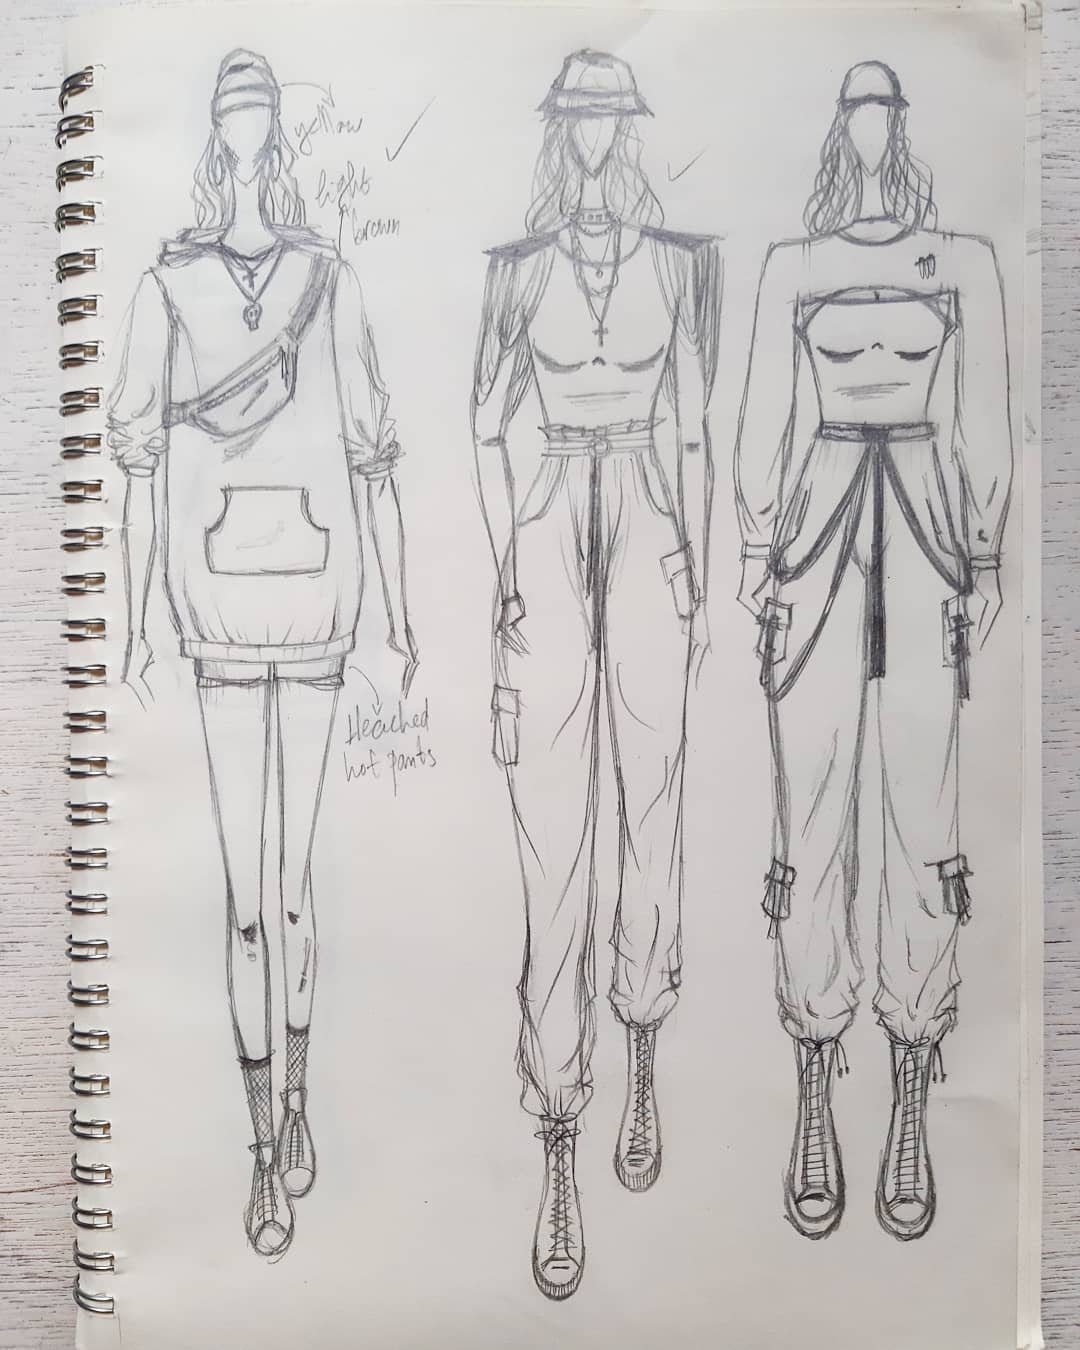 11. Three trendy outfits drawn in a fashion illustration style in a sketchbook.